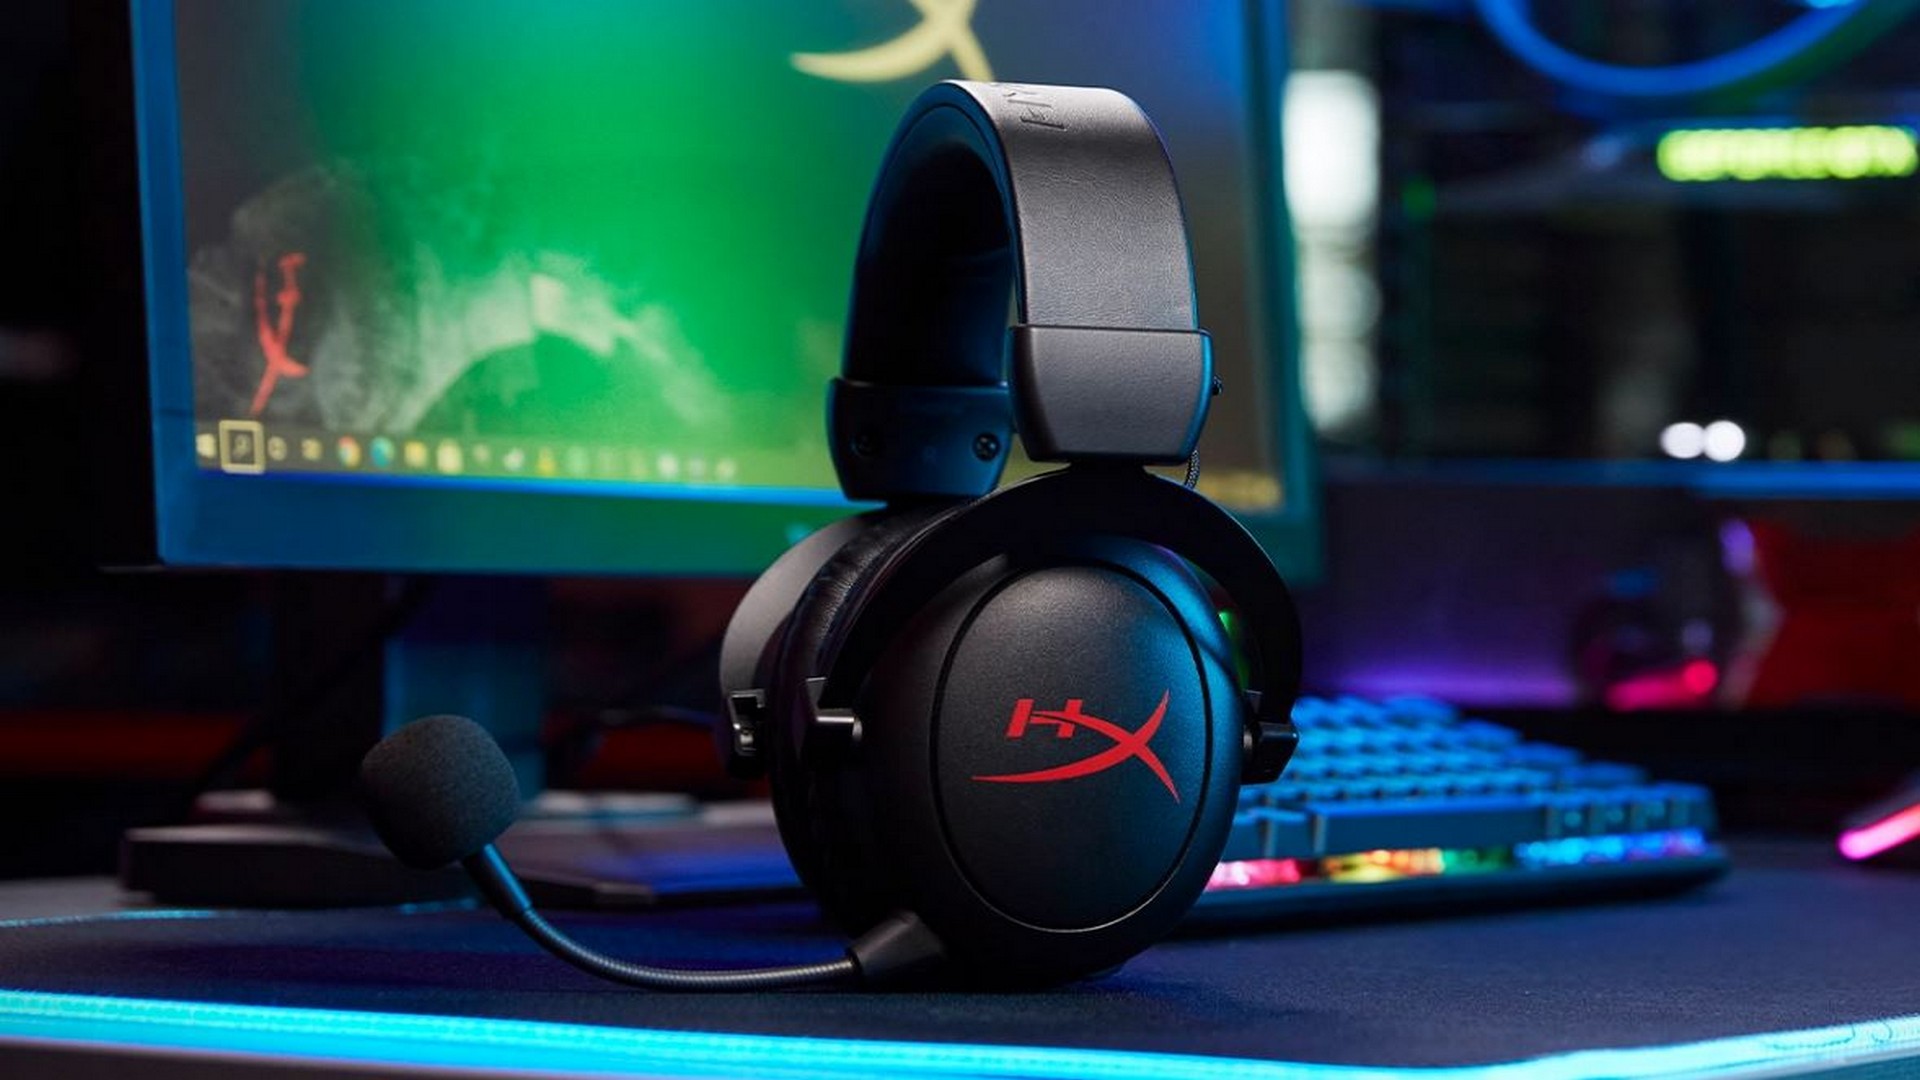 Cloud Core - DTS - Gaming Headset